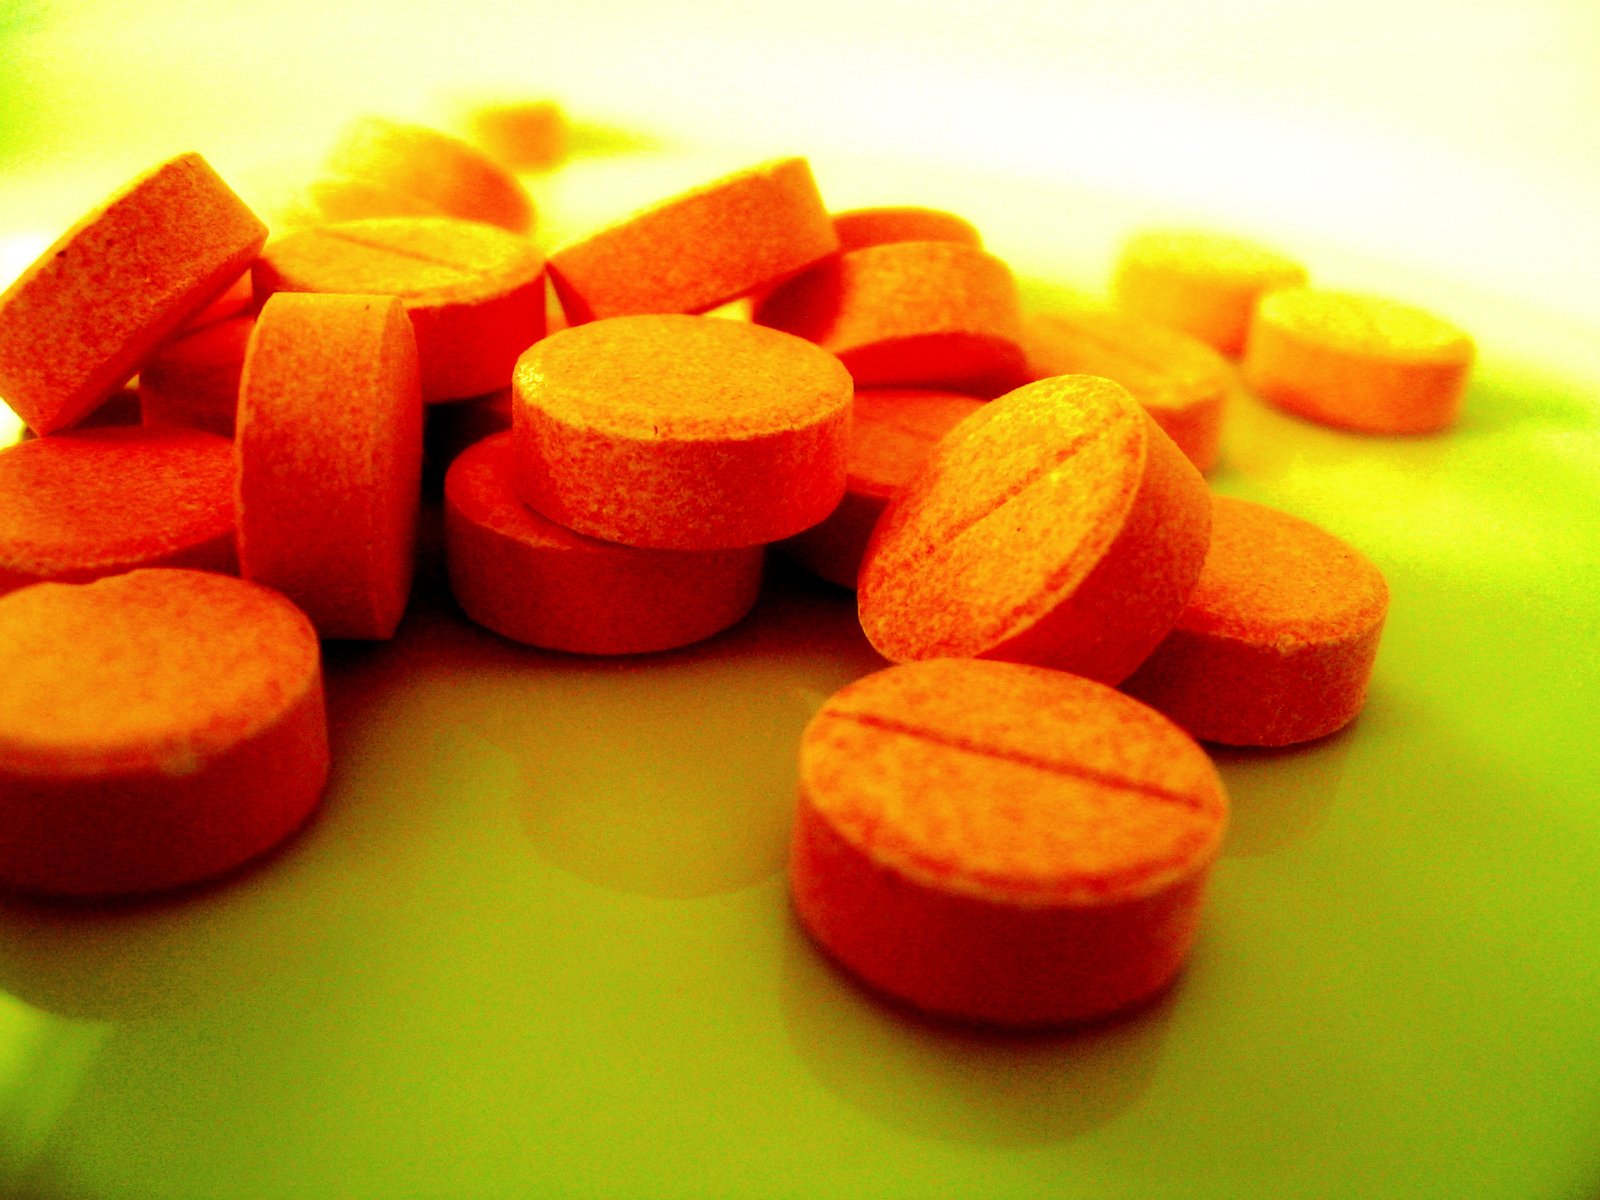 orange pills sitting on a table and yellow background